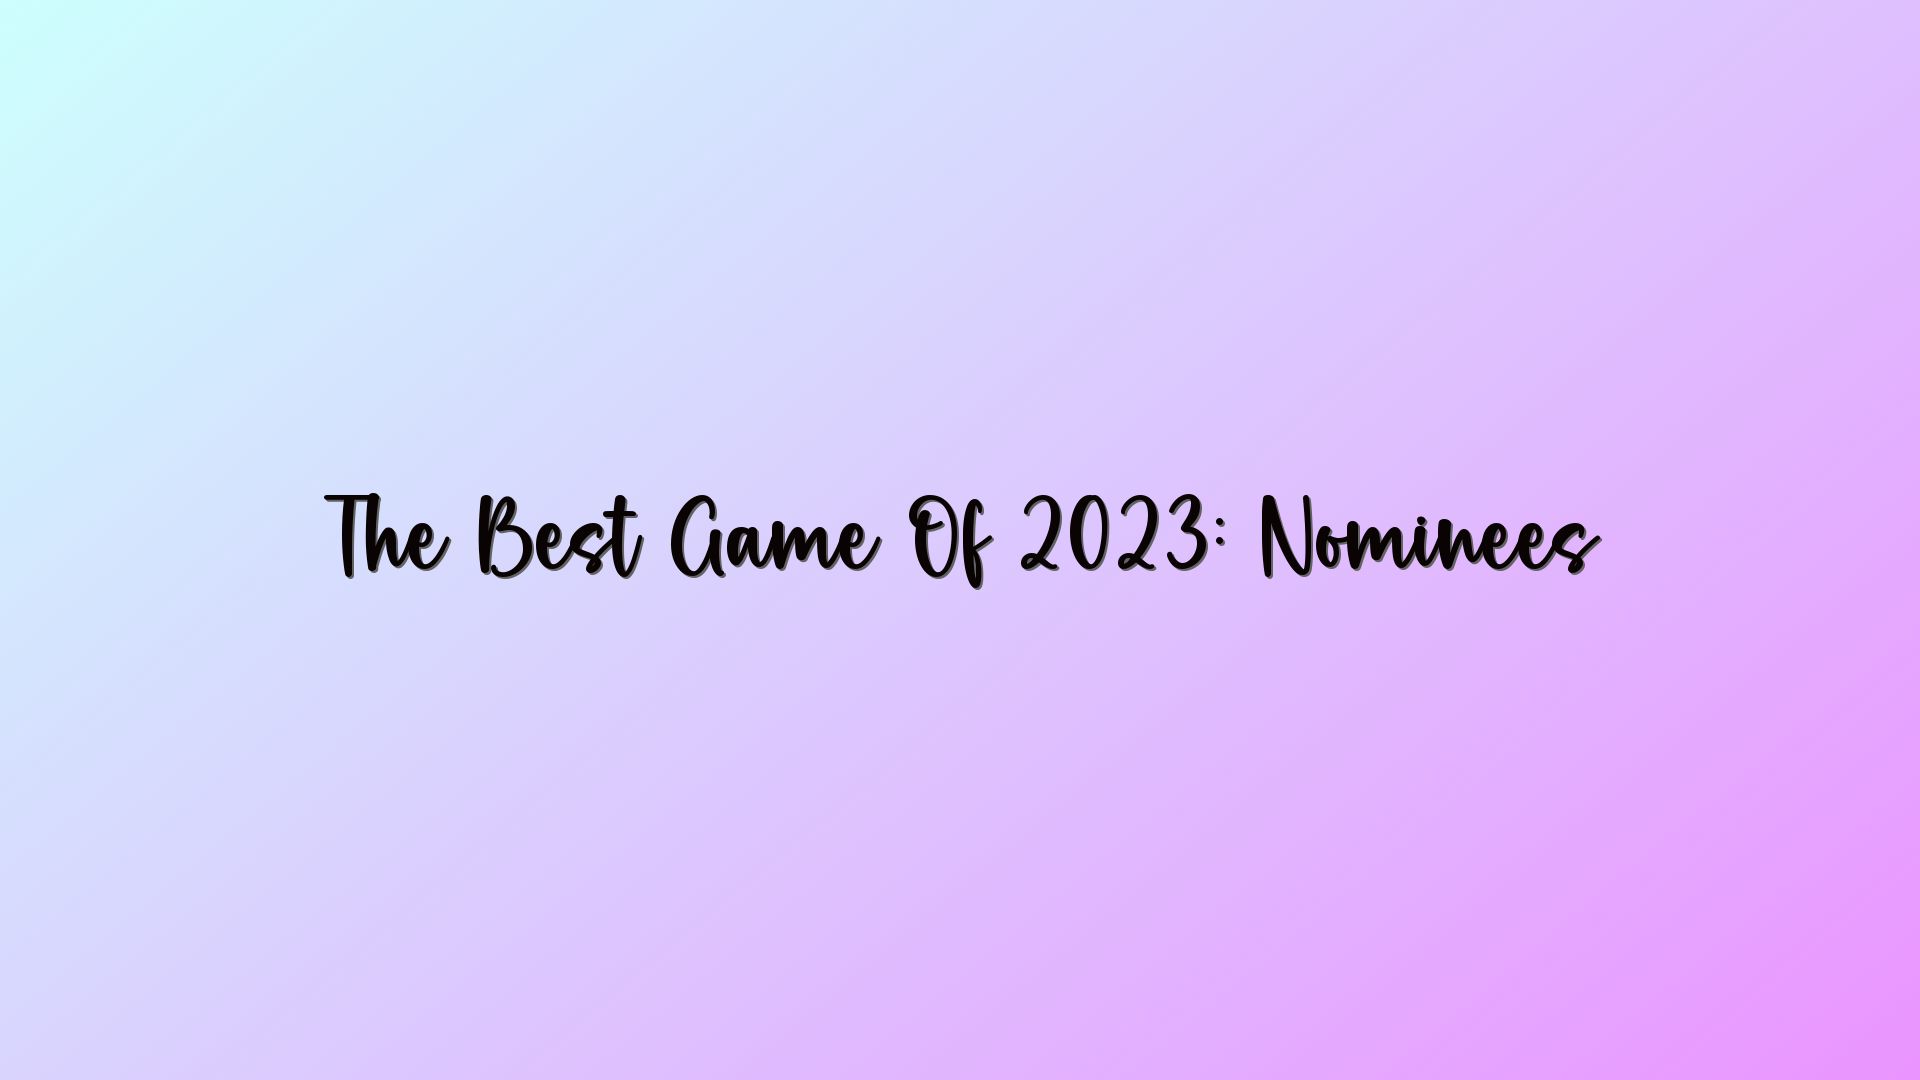 The Best Game Of 2023: Nominees